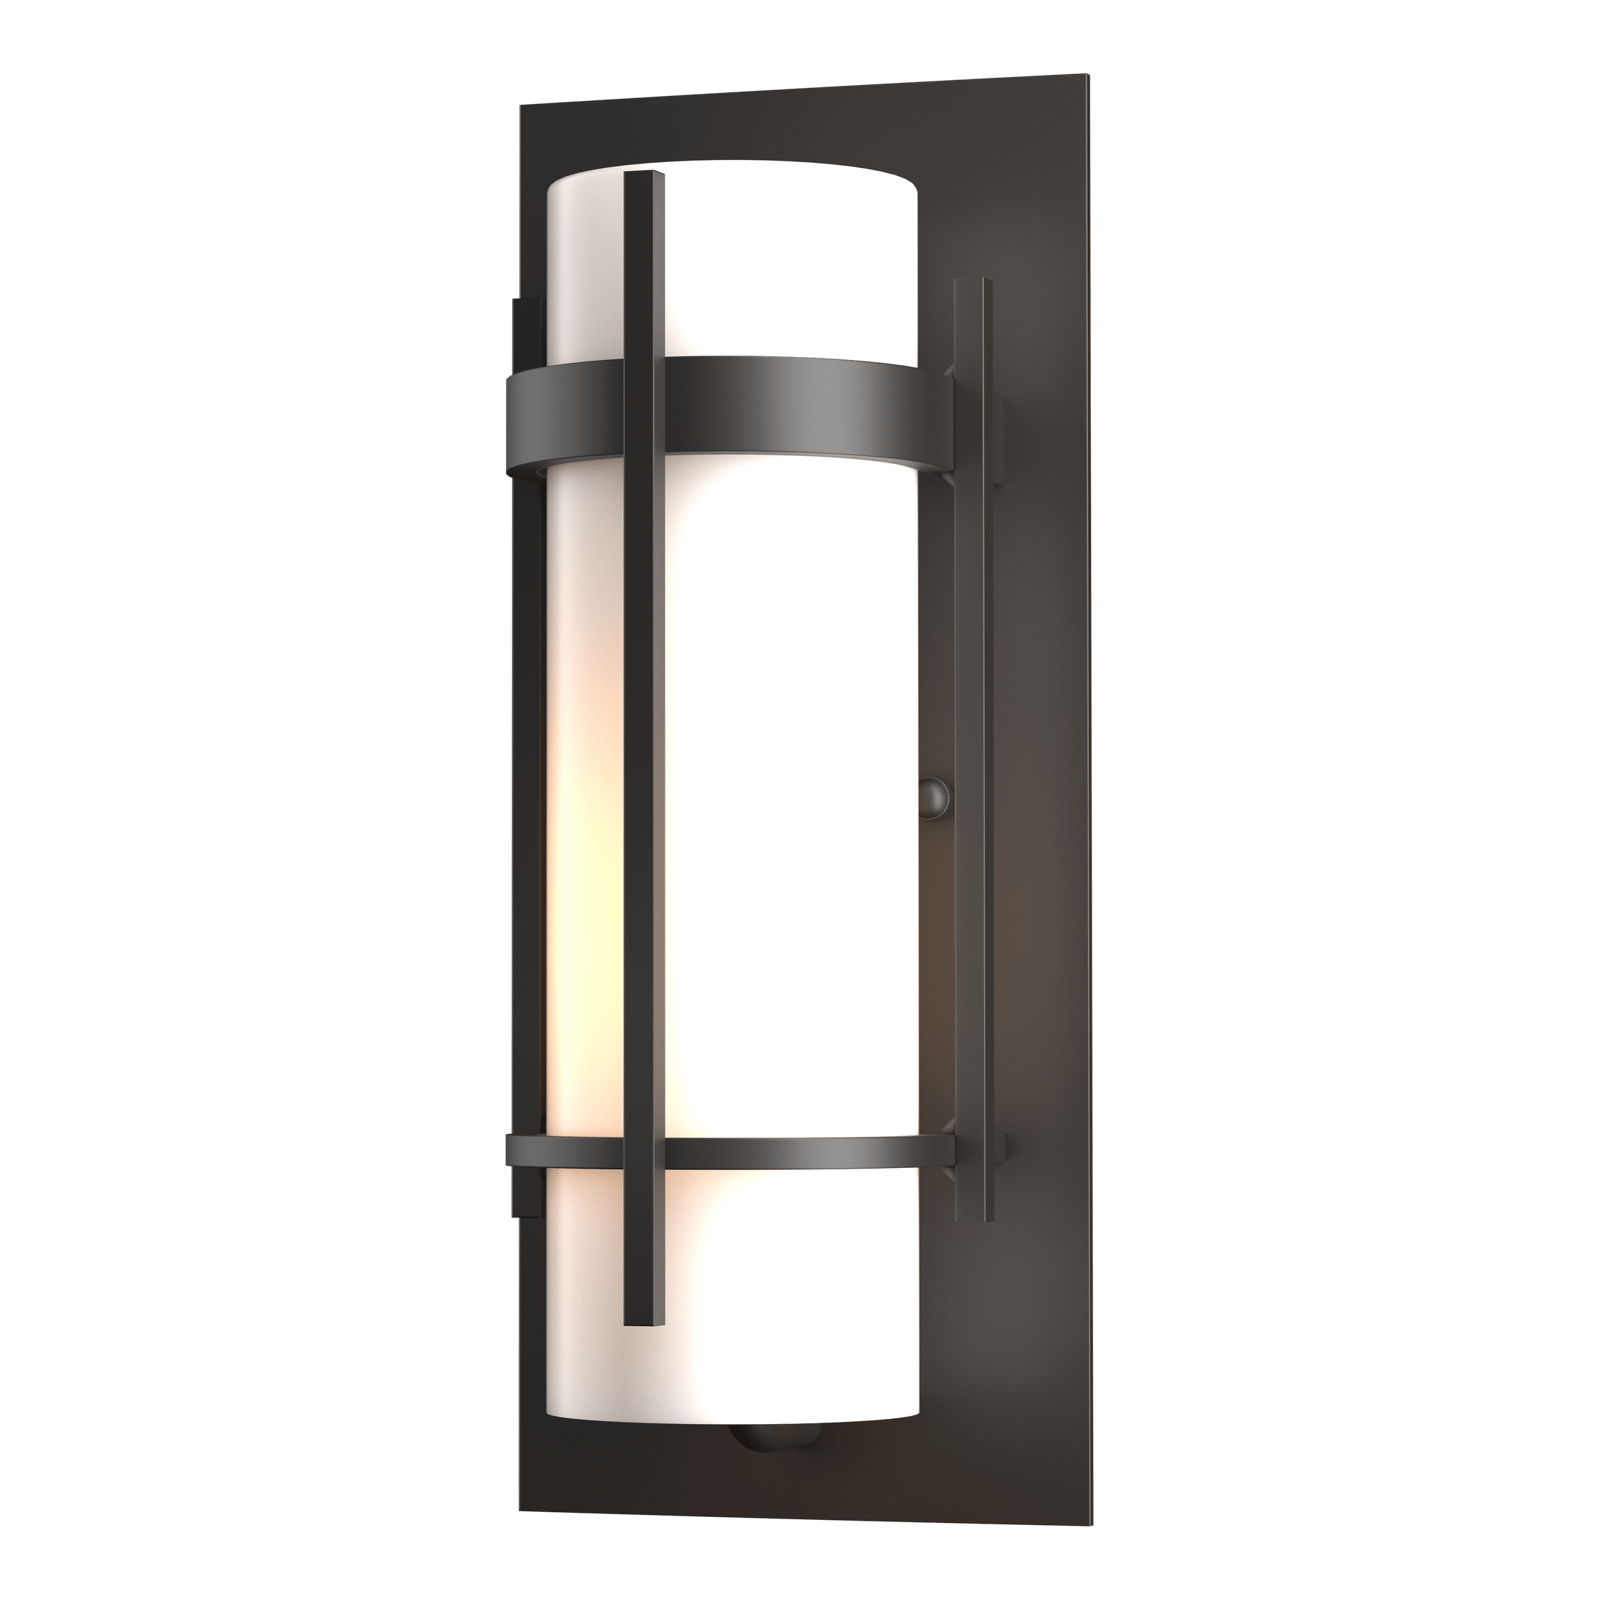 Hubbardton Forge Banded Outdoor Sconce